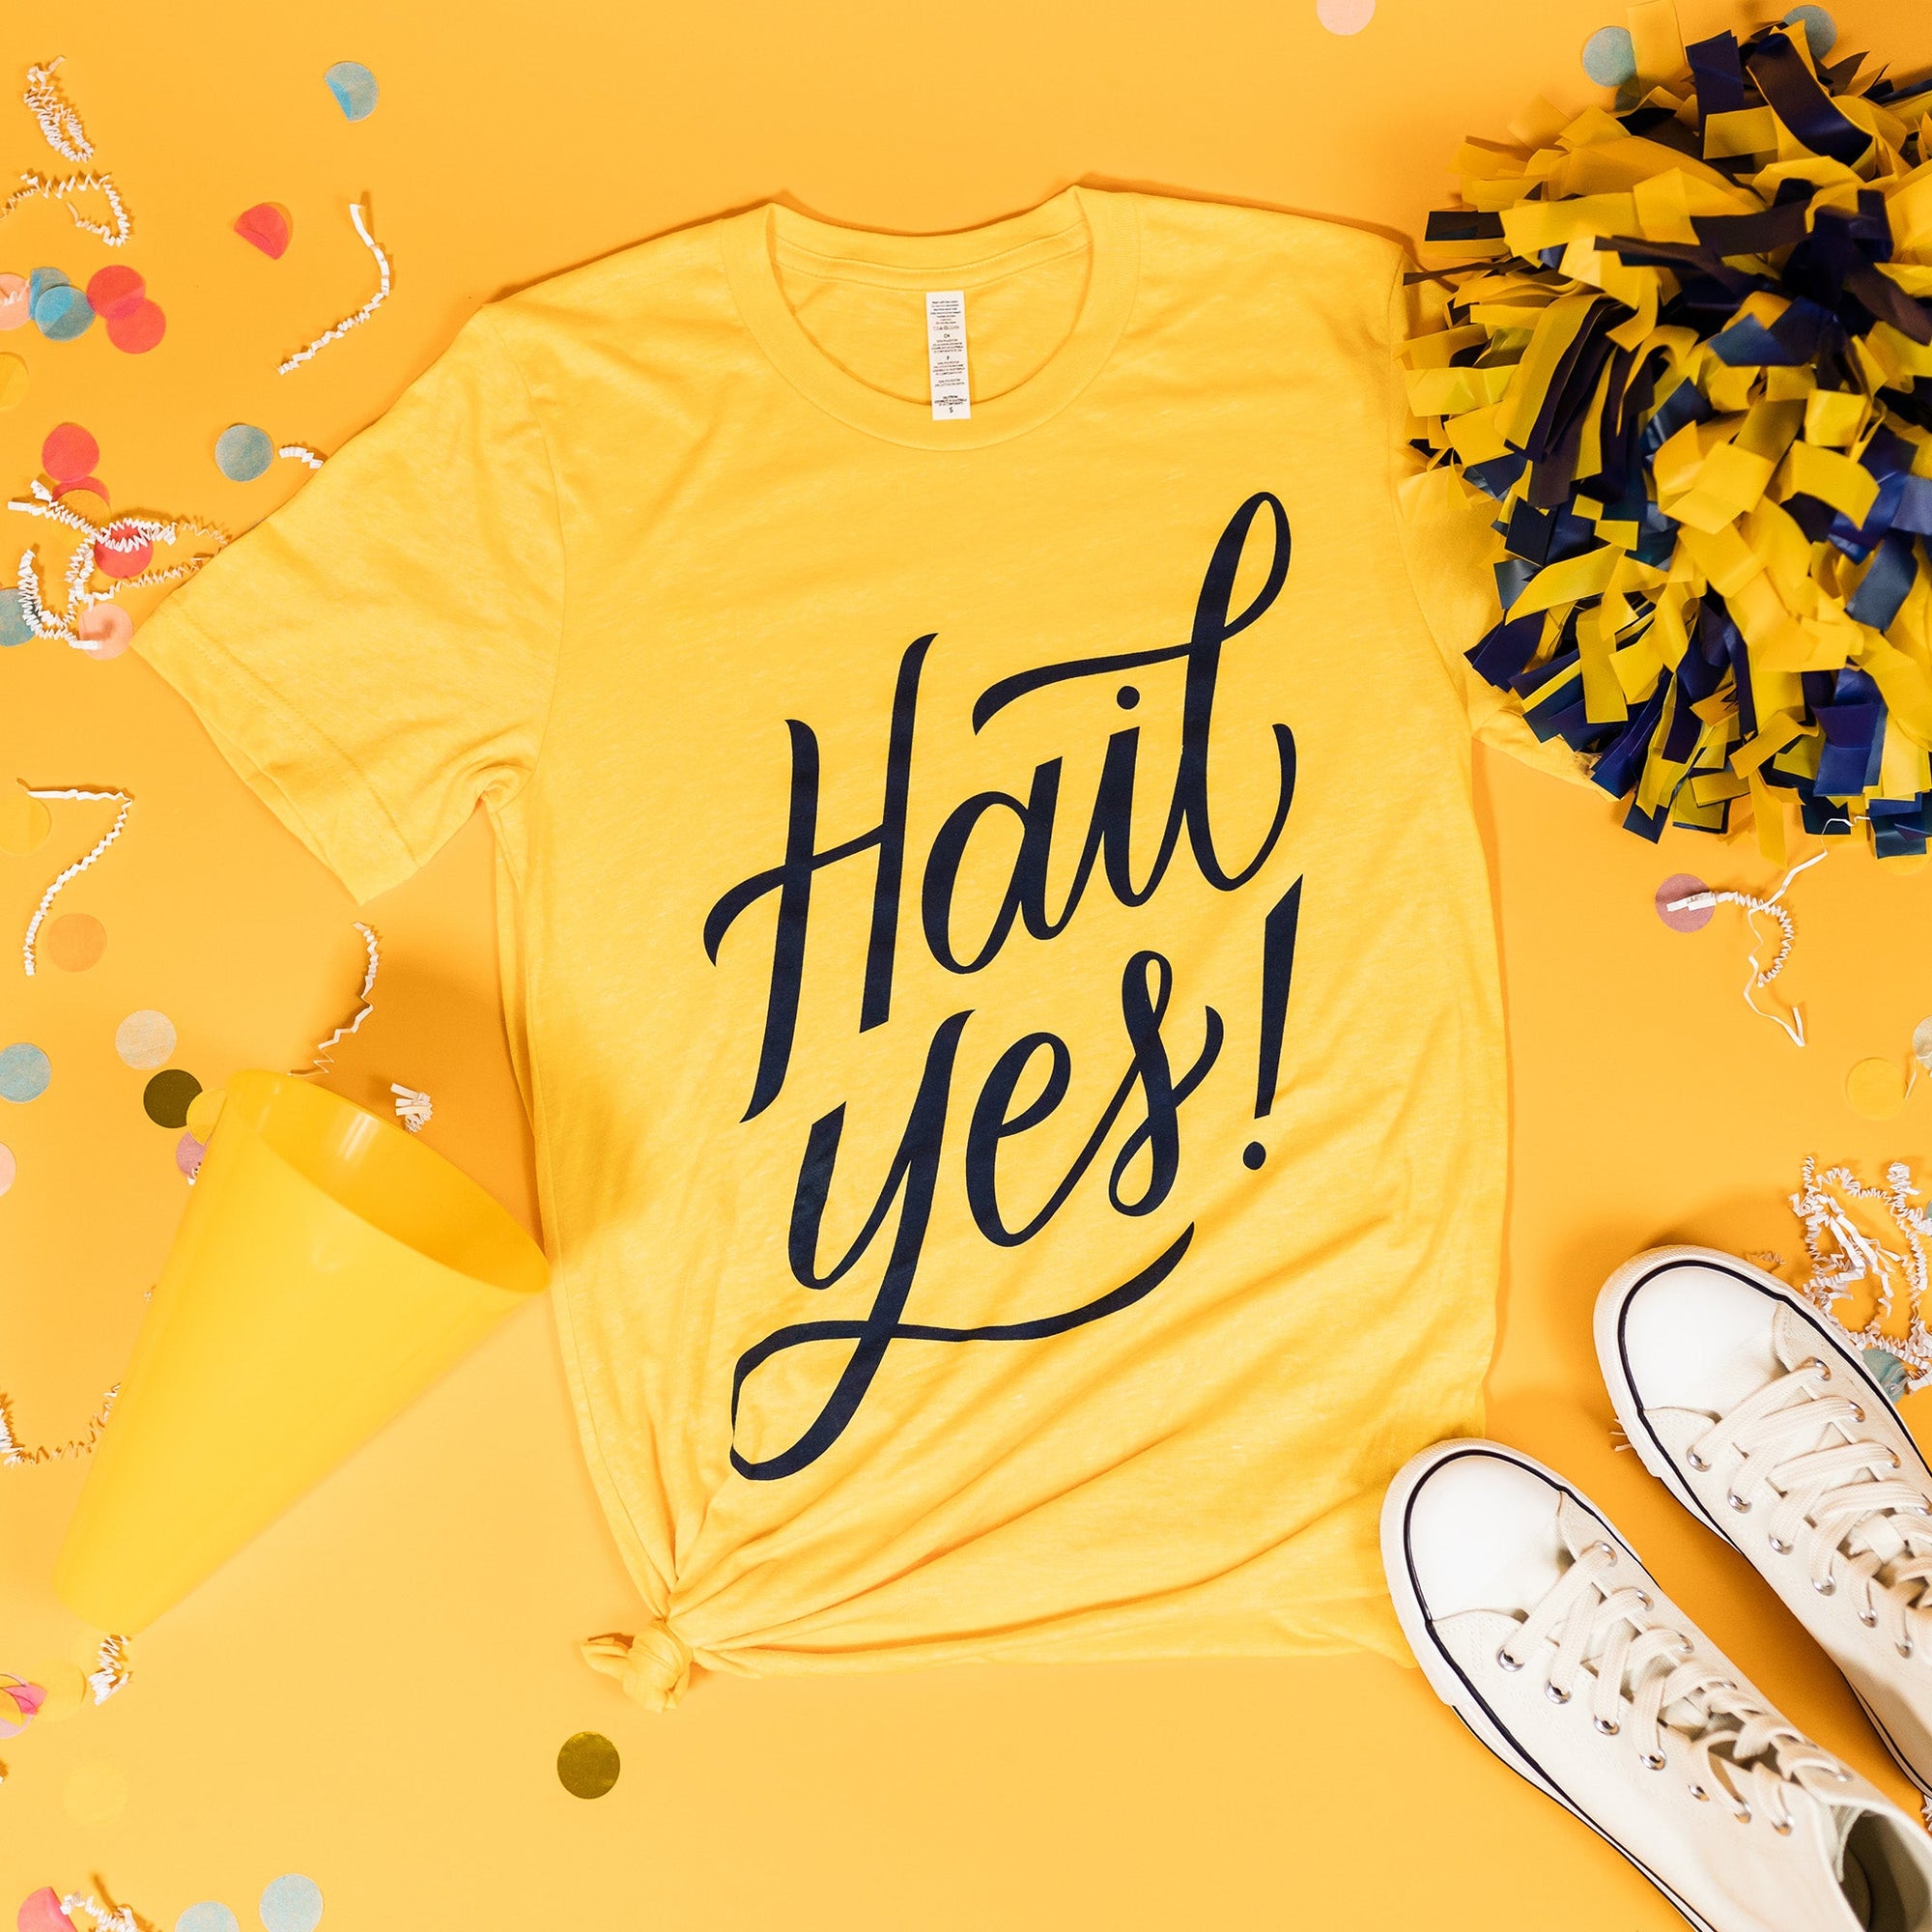 On a sunny mustard background sits a t-shirt with white crinkle and big, colorful confetti scattered around. There is a yellow and navy pom pom, a yellow mini megaphone, and a pair of white sneakers. This yellow tee says "Hail Yes!" in blue lettering.